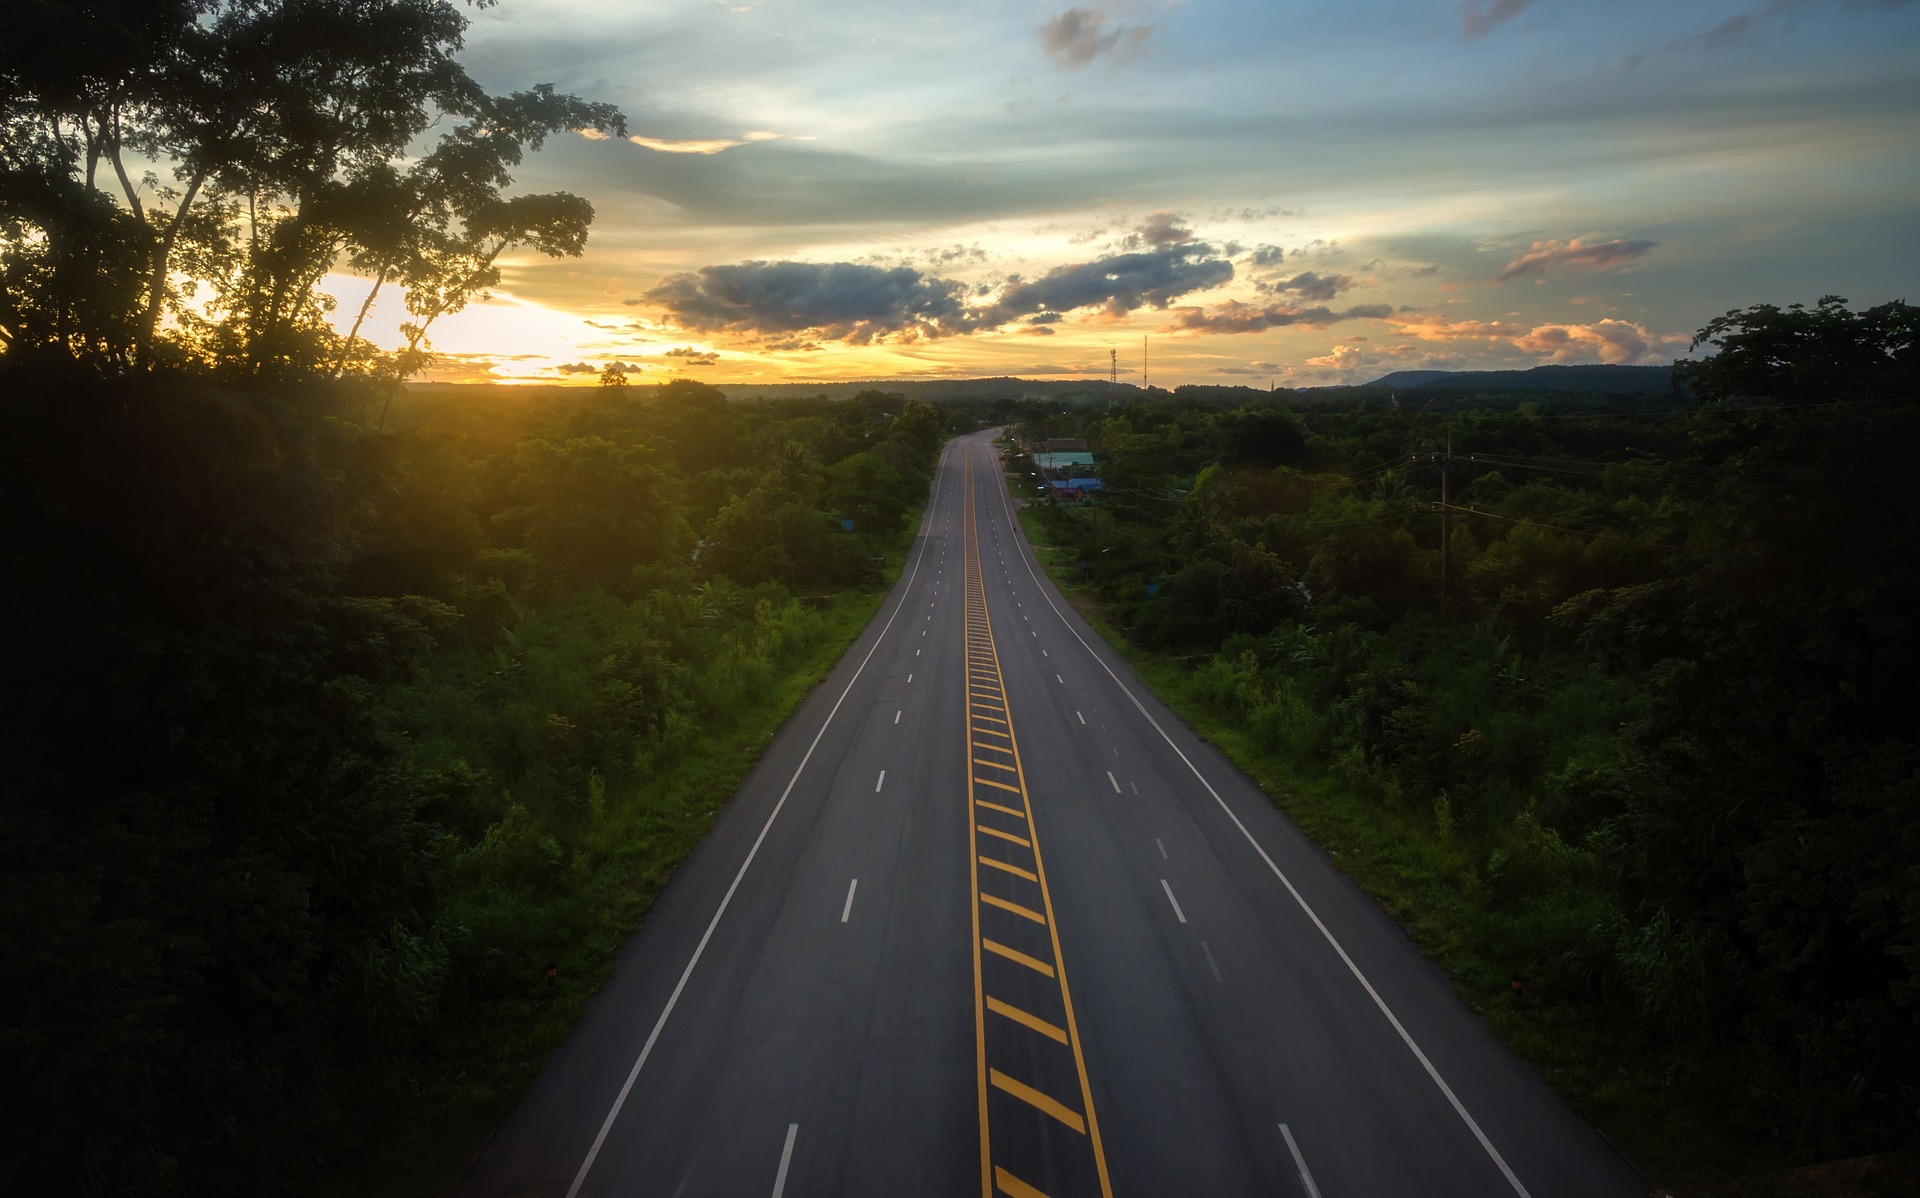 images/The%20Road%20Less%20Traveled-%20Is%20it%20calling%20to%20you%20.jpg#joomlaImage://local-images/The Road Less Traveled- Is it calling to you .jpg?width=1920&height=1198